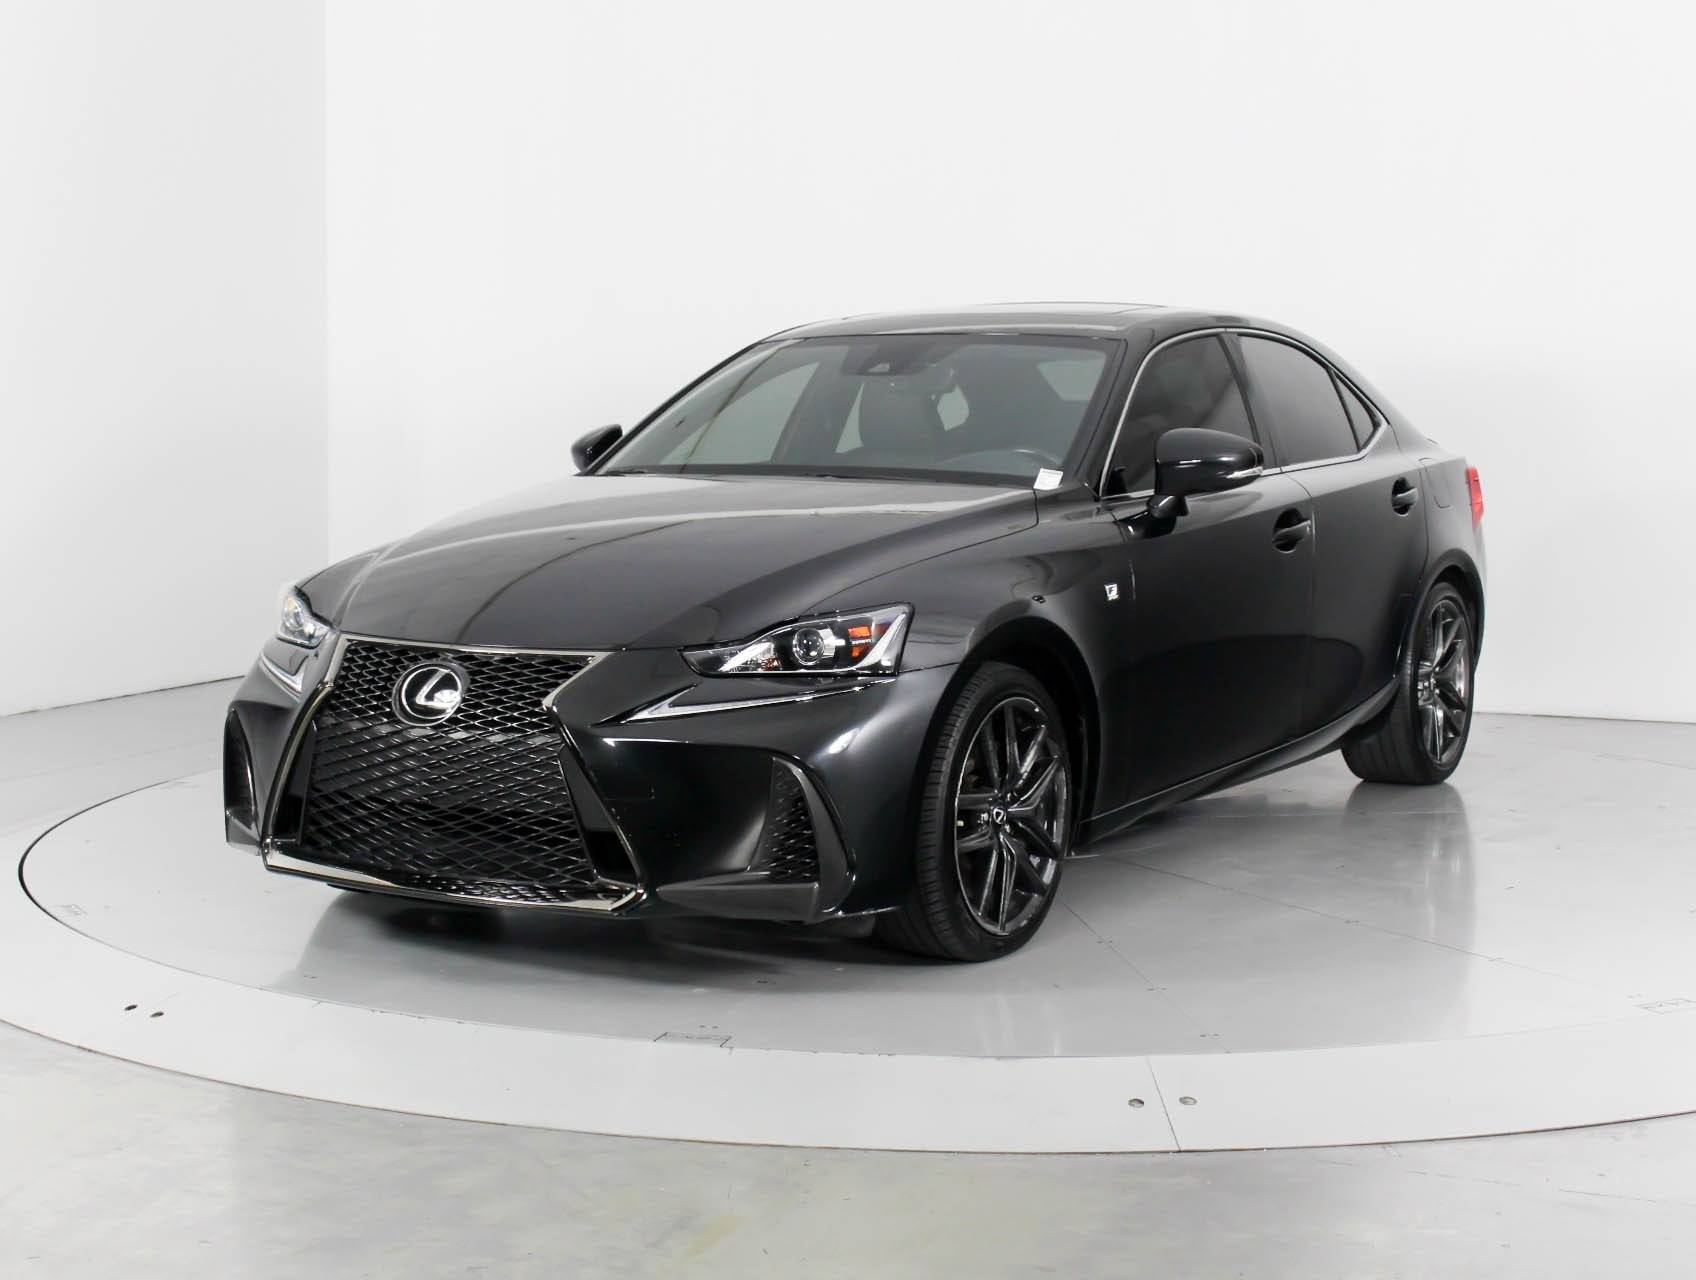 Used 2017 Lexus Is 200t F-sport Sunroof Rearview Vent Seats For Sale 24895 Formula Imports Stock F10420